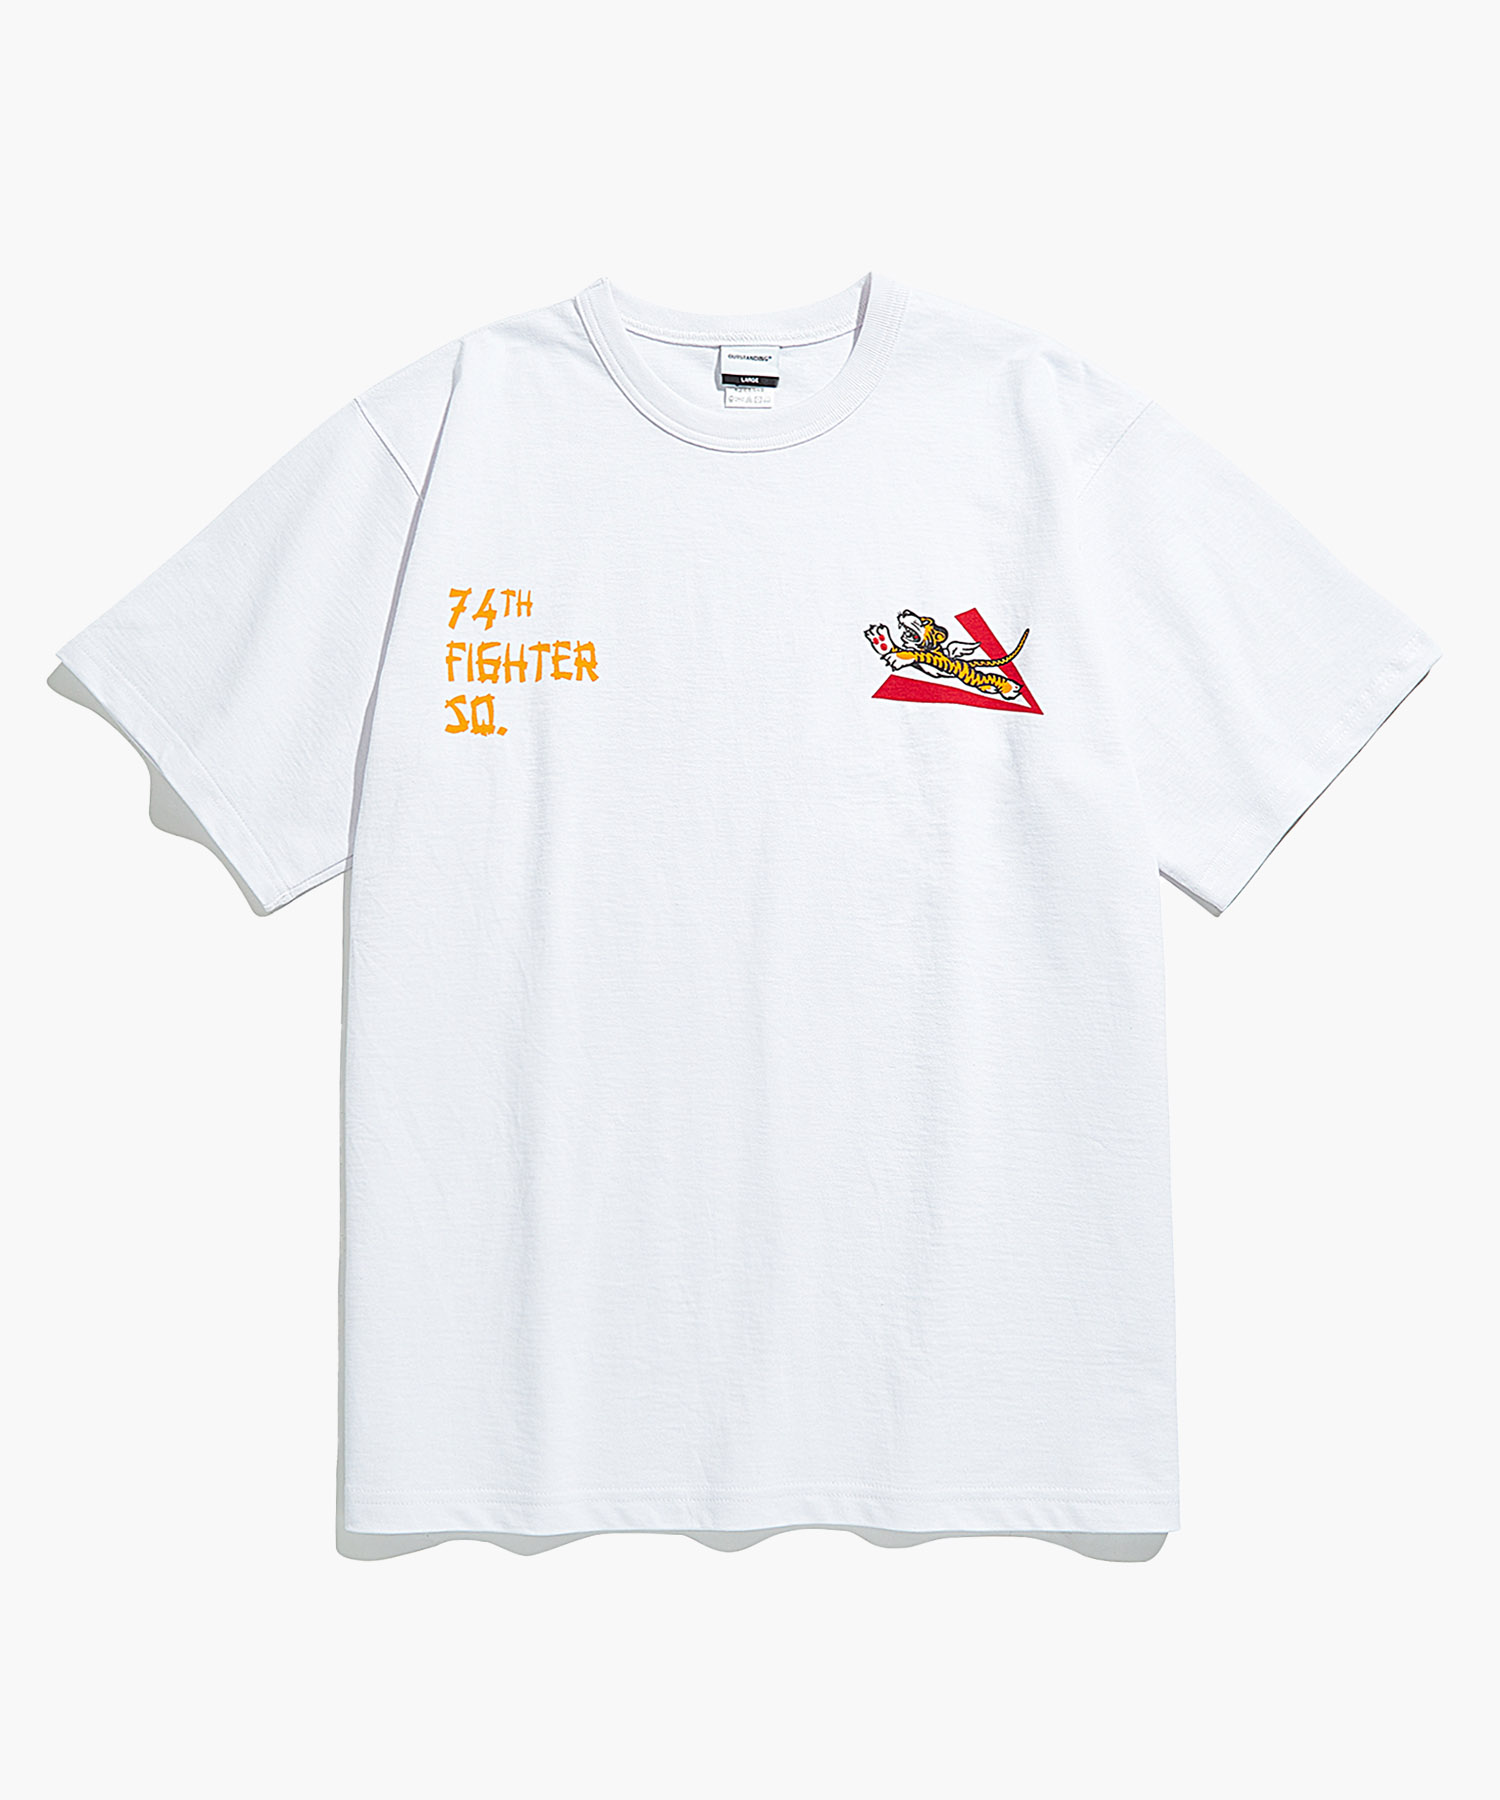 MIL SERIES TEE (74TH FIGHTER SQ)_WHITE